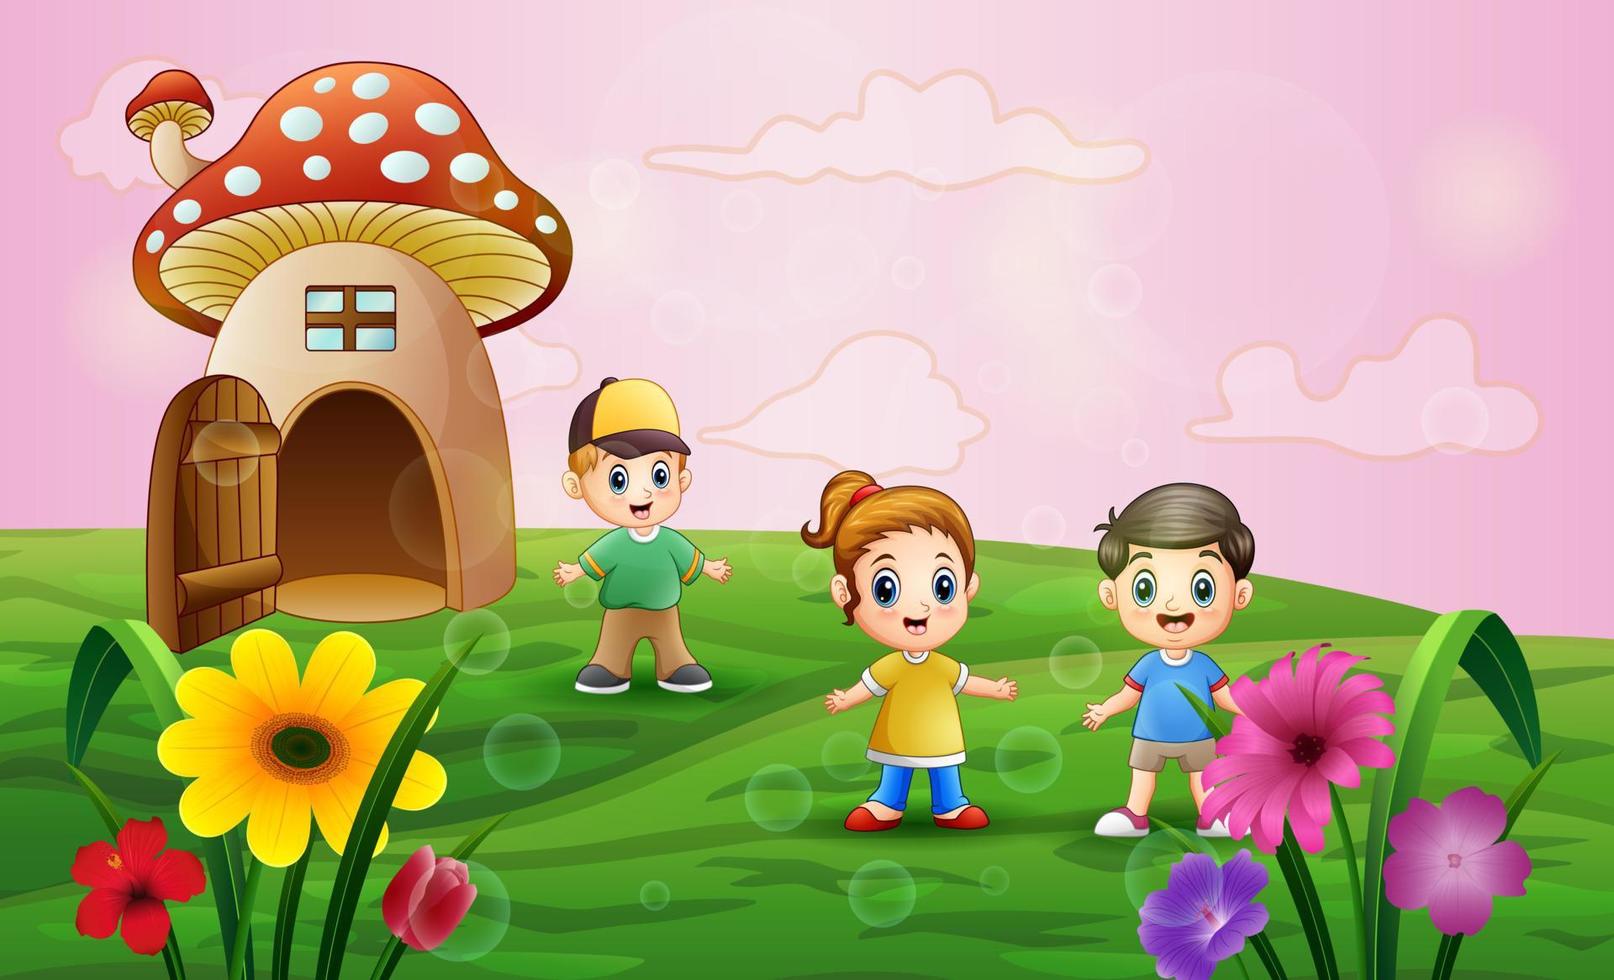 Mushroom house with children playing in the field vector